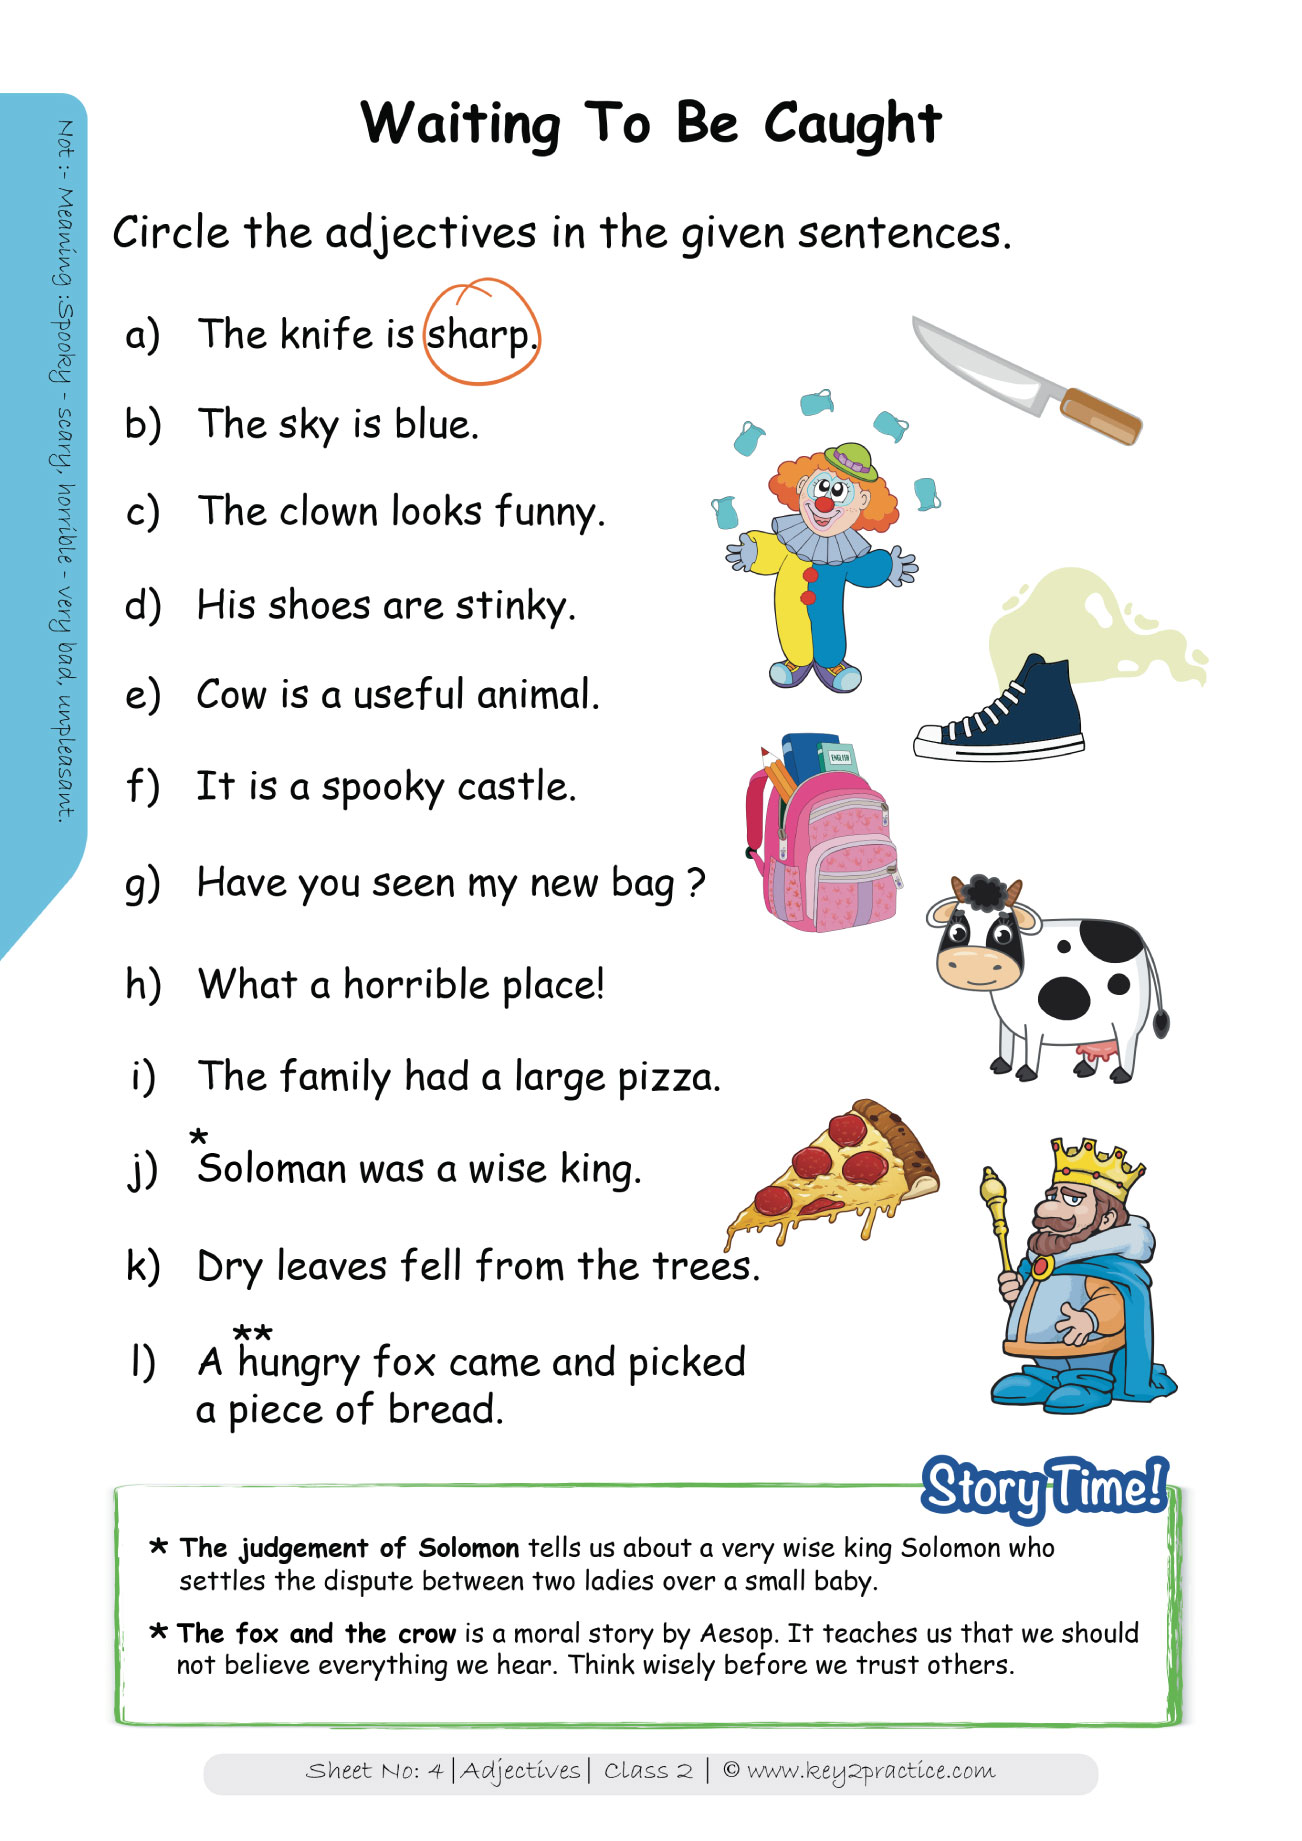 18-best-images-of-adjectives-worksheets-for-grade-2-free-adjective-adjectives-and-nouns